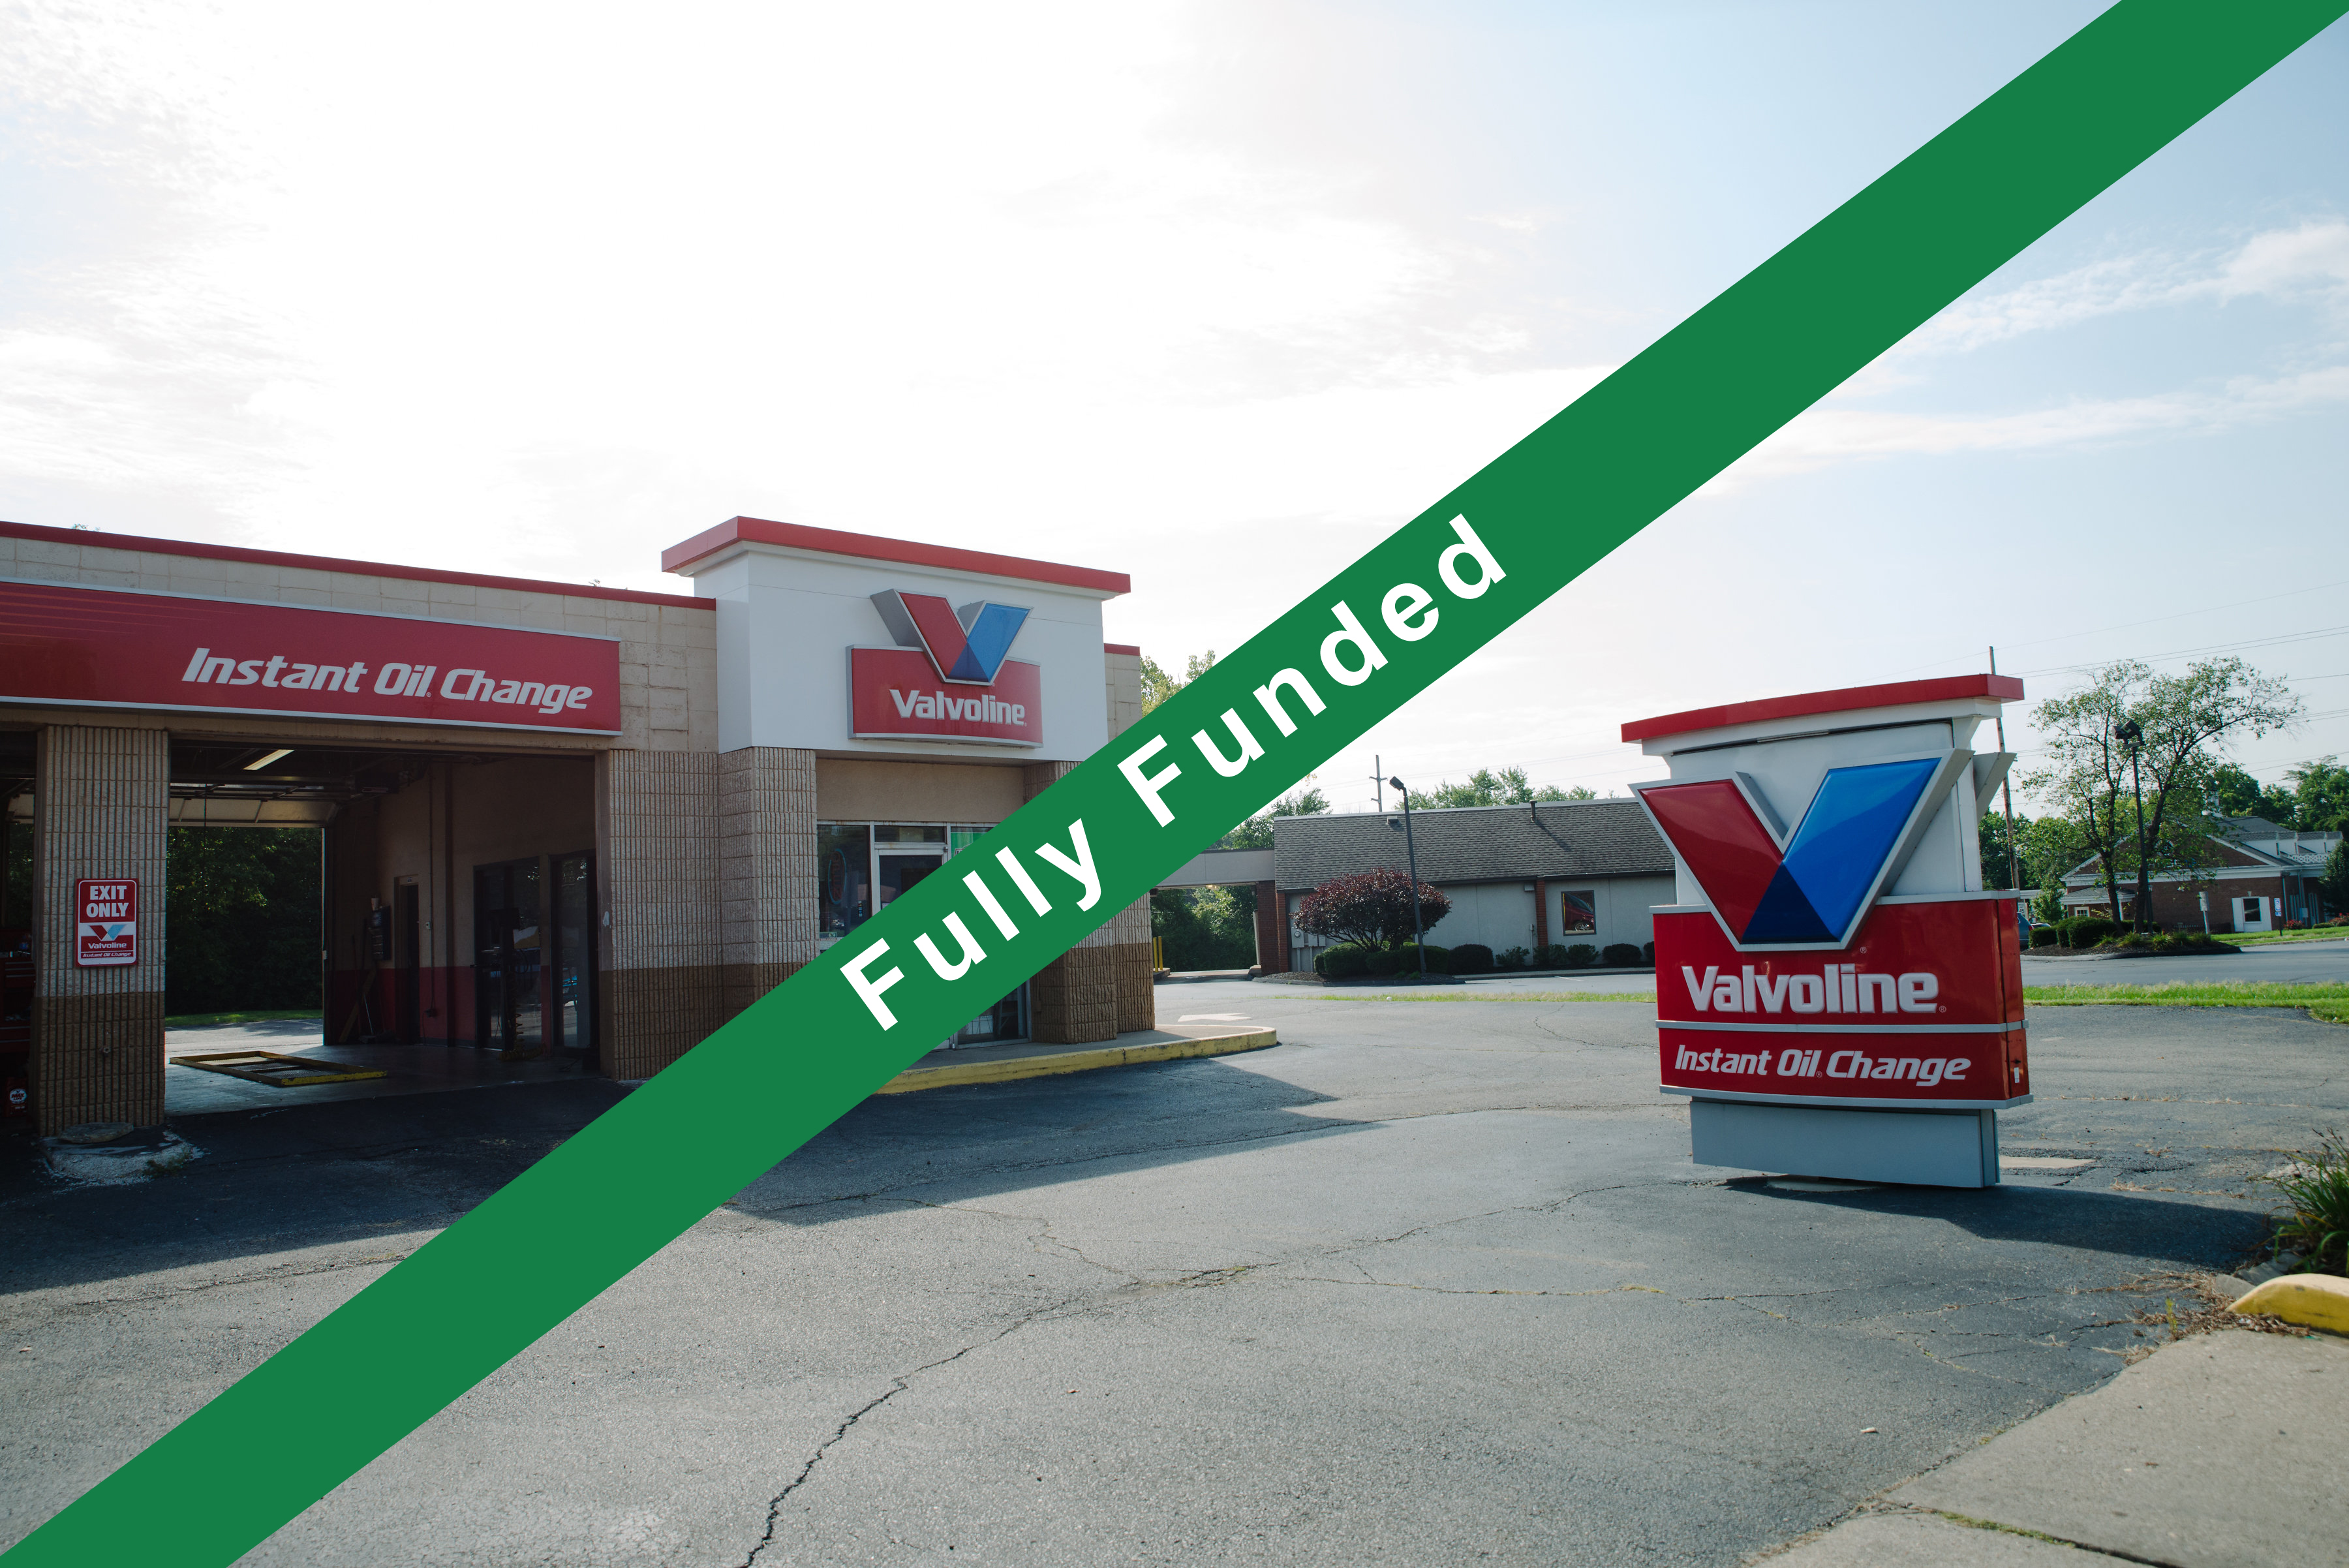 Valvoline Instant Oil Change investment property-crowdfunding real estate